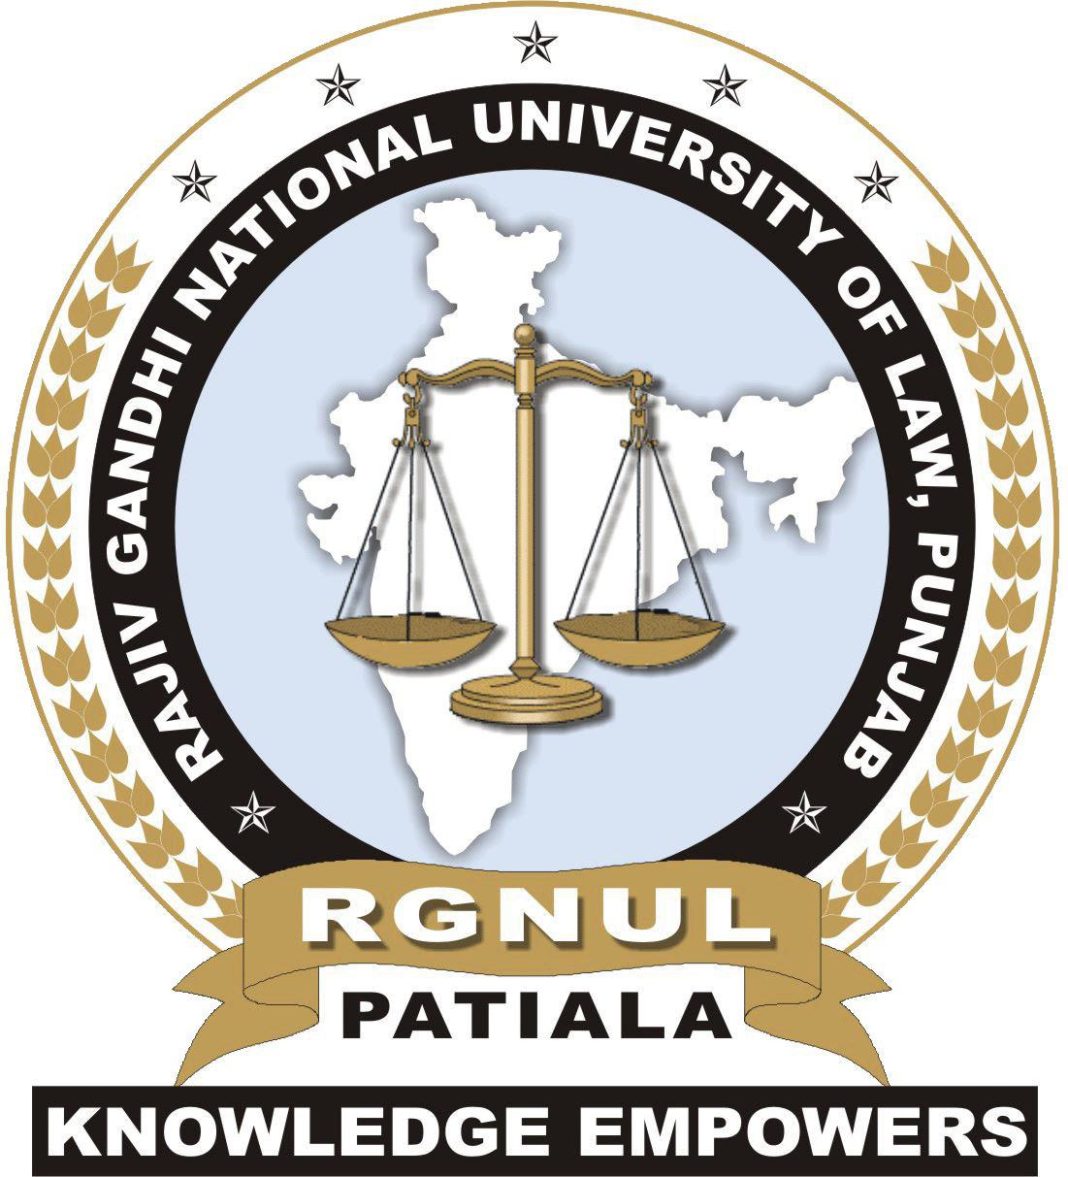 One Week National Workshop for law students on “Right to Information: A Revolutionary Law” by RGNUL -6th- 12th October 2021